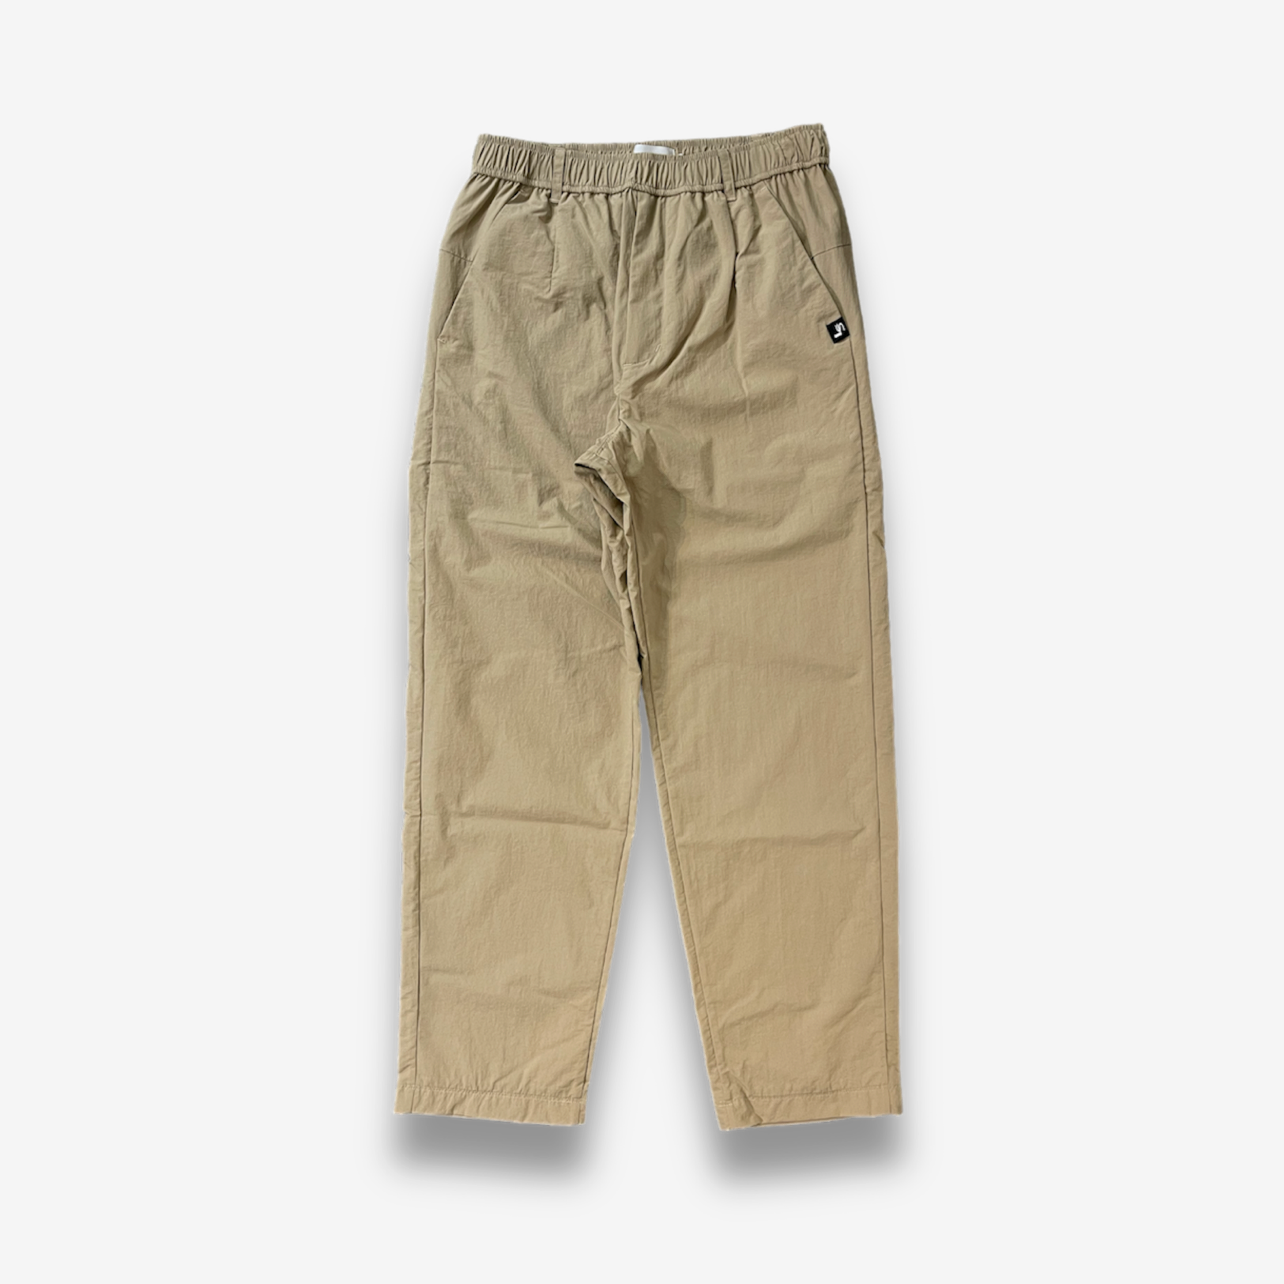 Liss / POLYESTER TAPERED PANTS / BEIGE